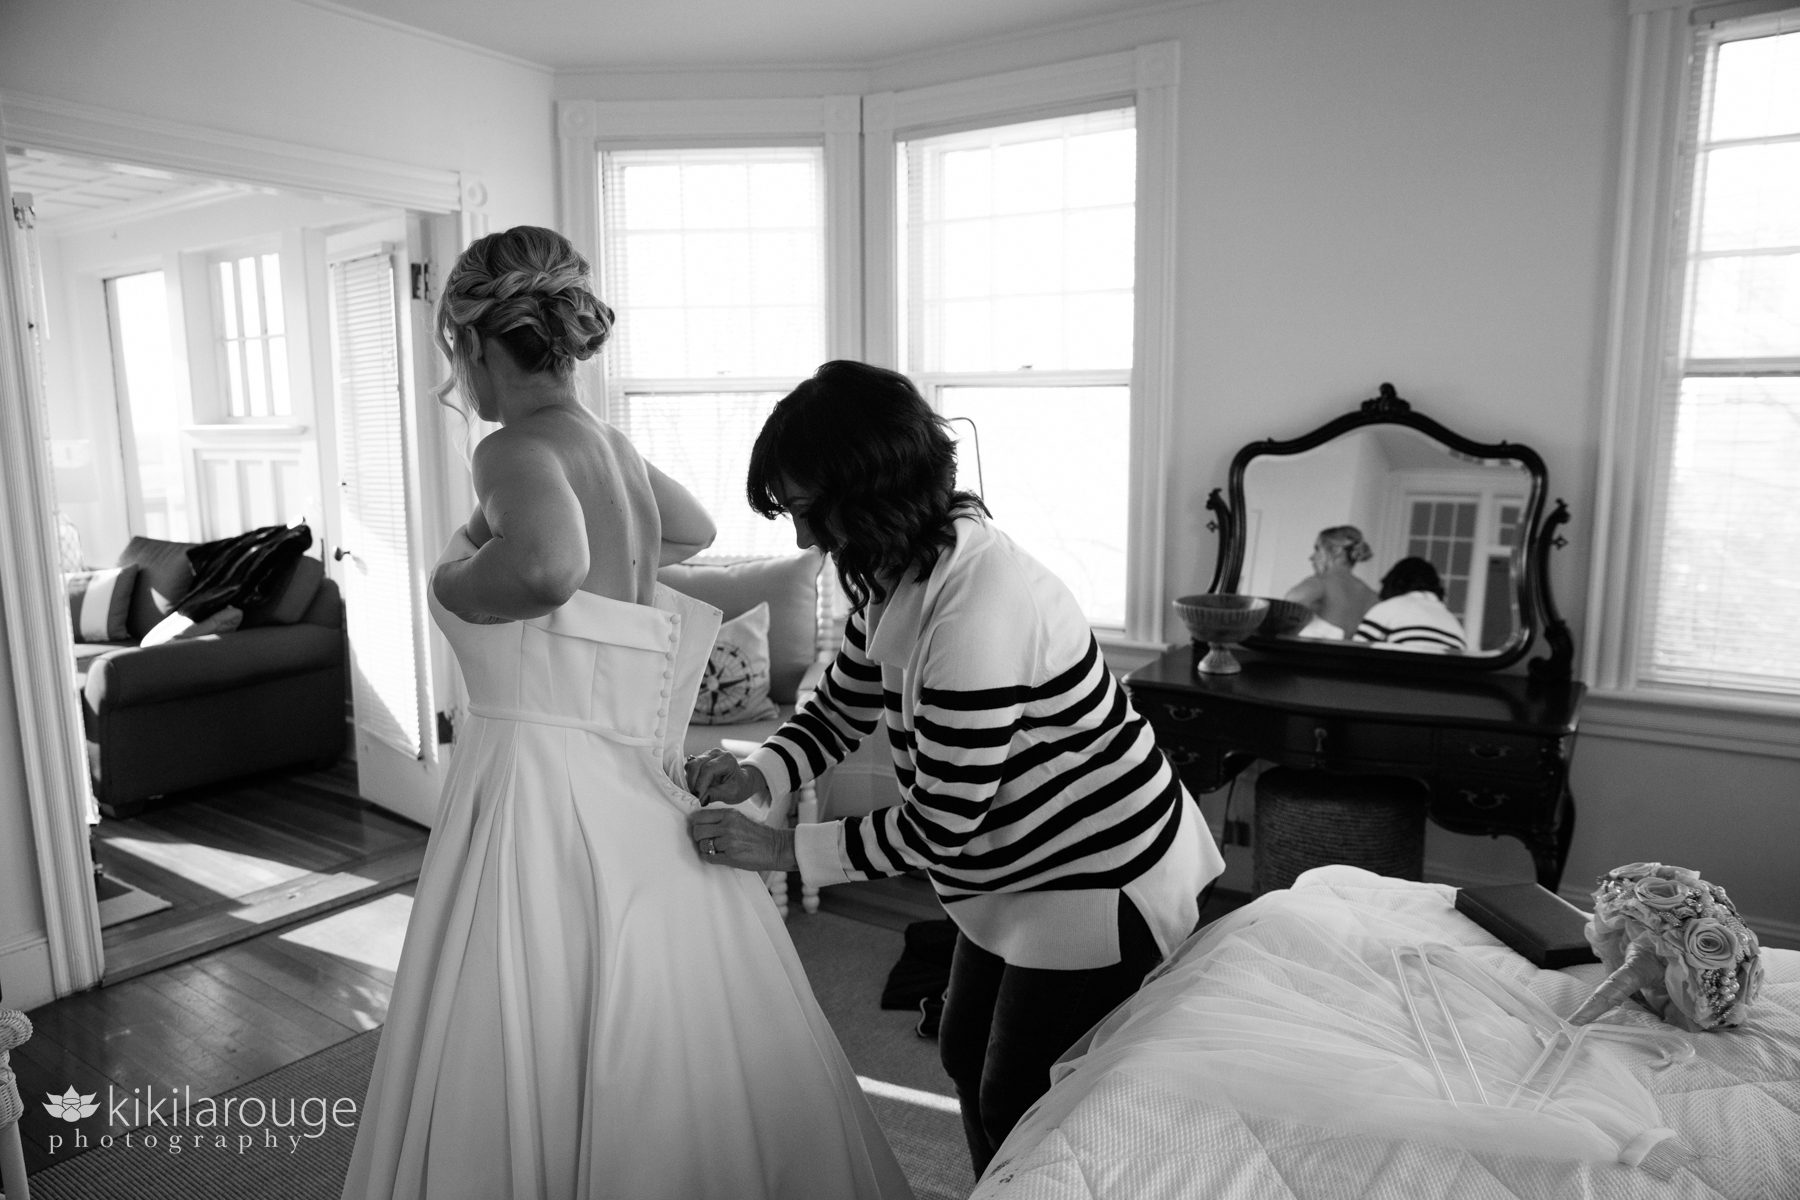 BW of Mom in striped sweater zipping up the back of her daughter's wedding gown